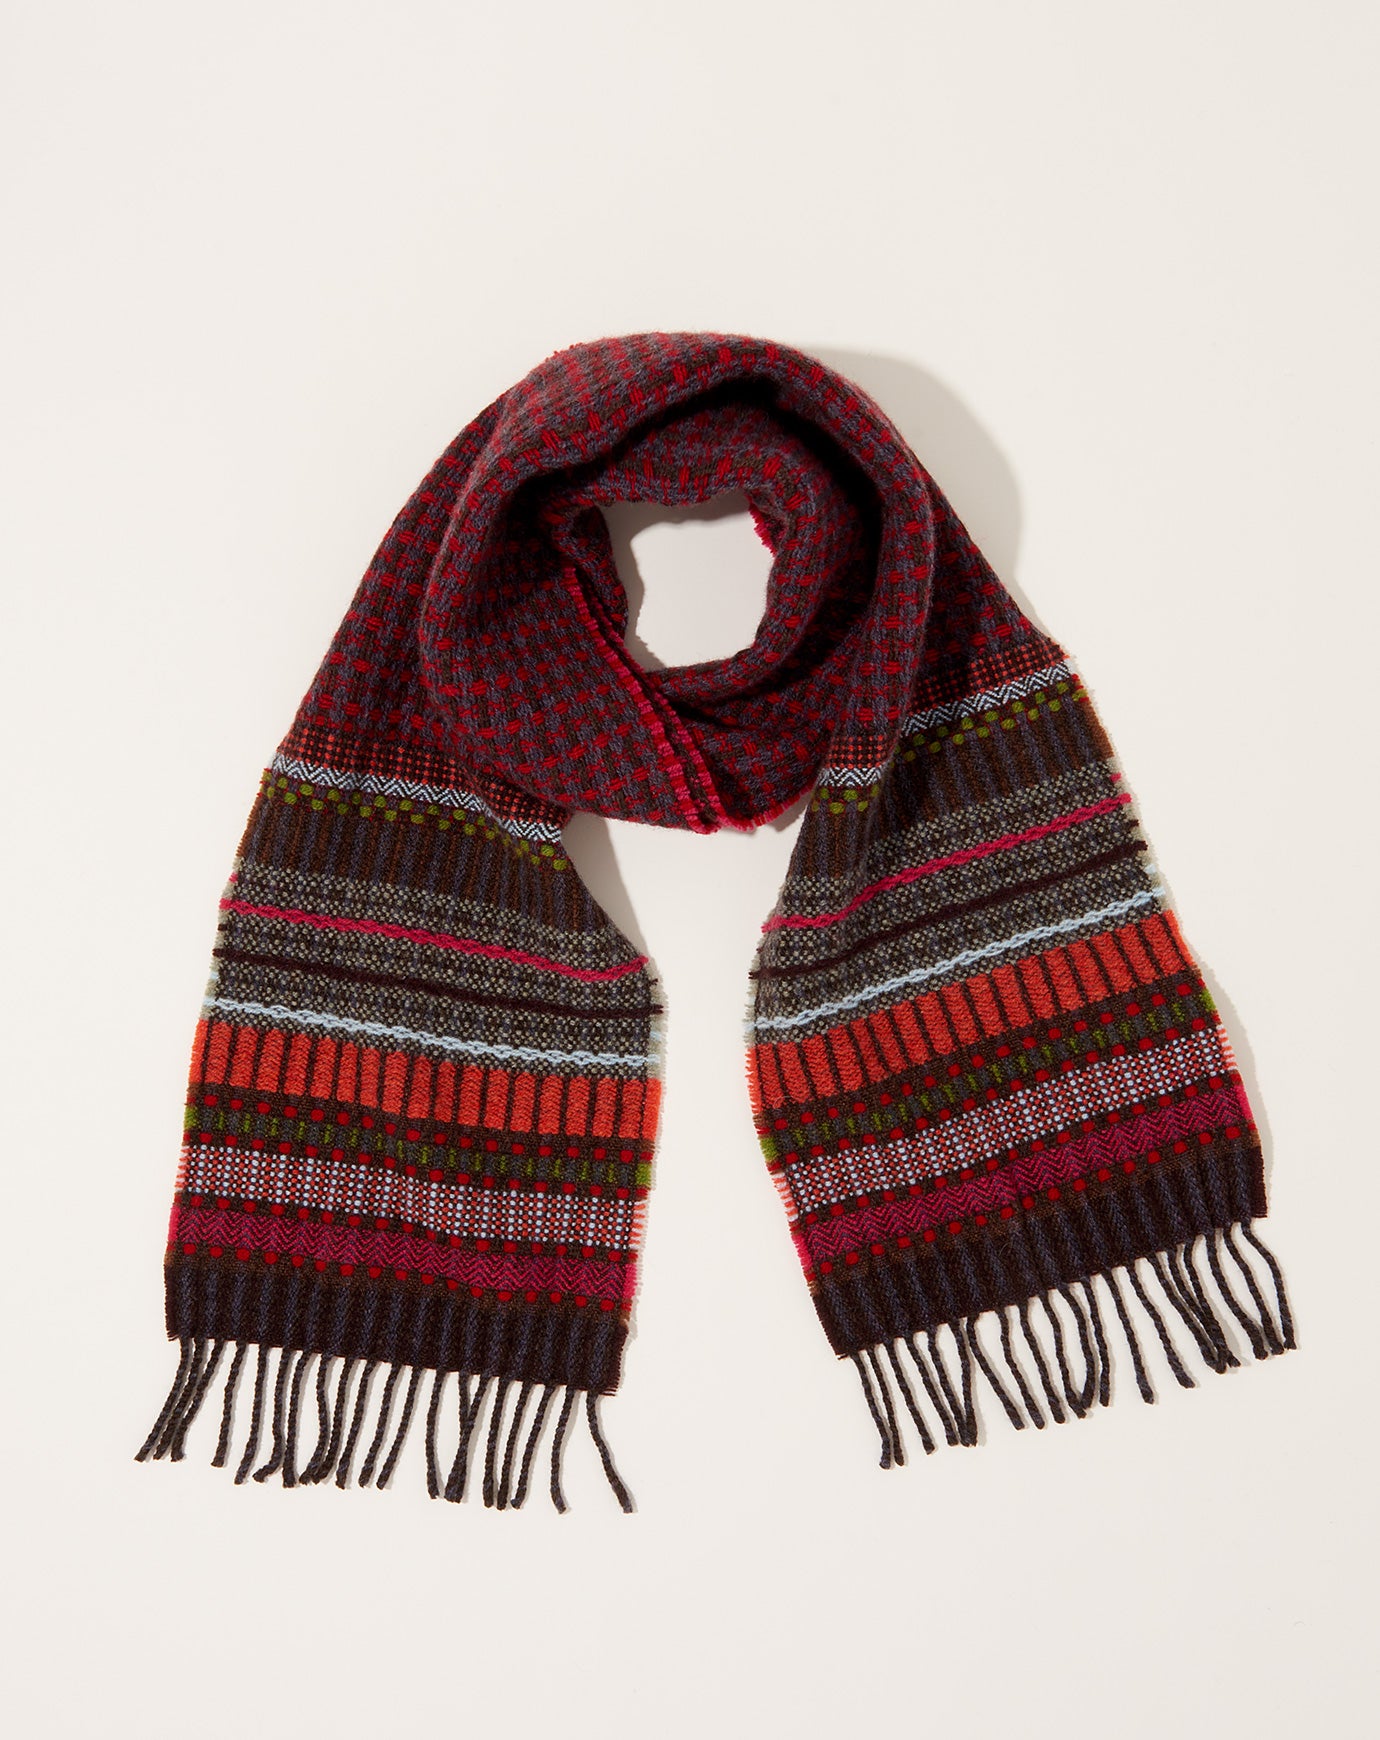 Wallace Sewell Fremont Scarf in Beetroot